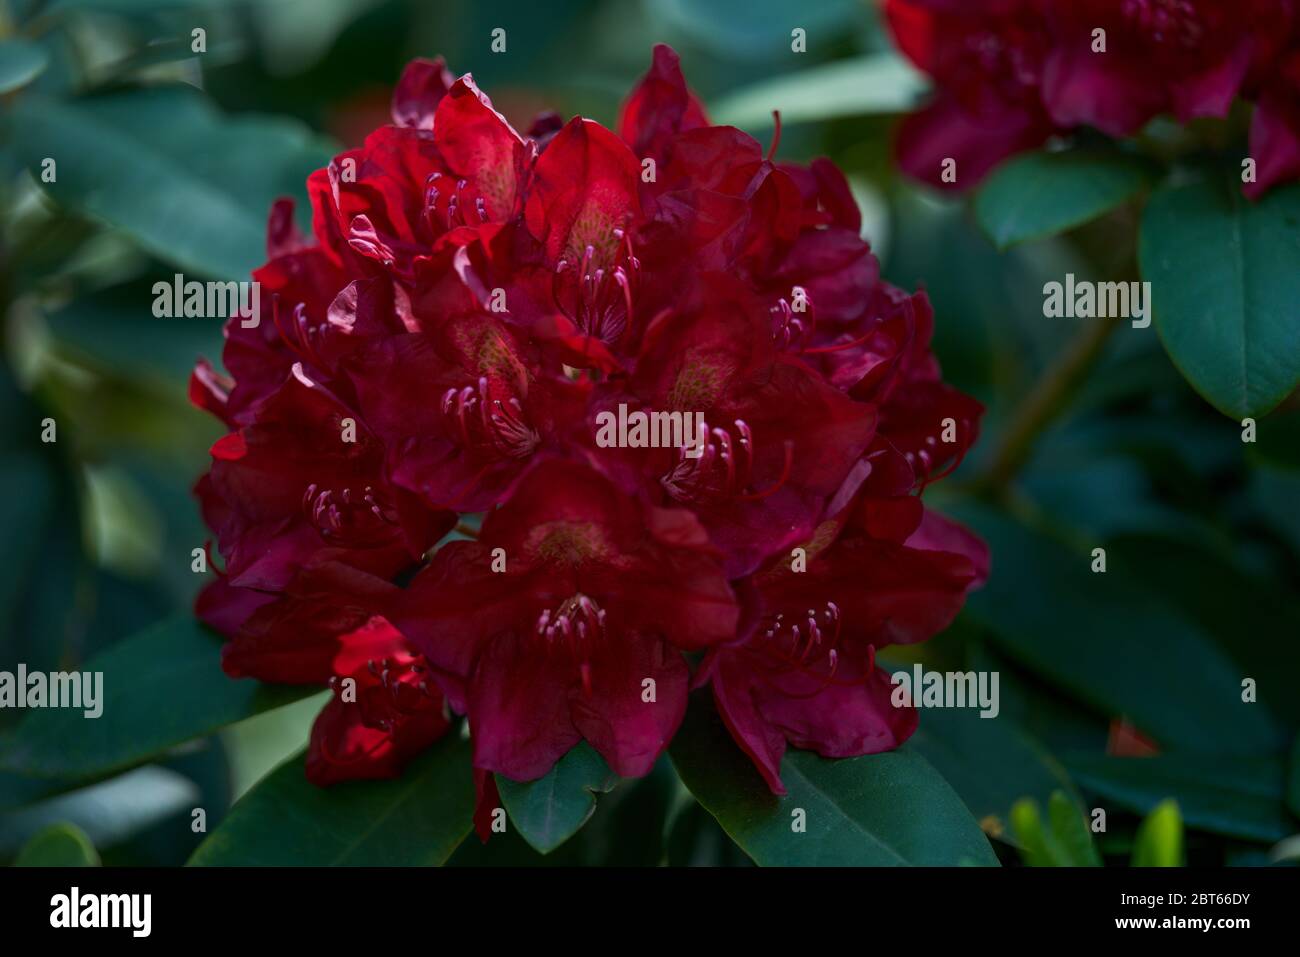 Lush rhododendron scarlet blossom close up Rhododendron Francesca Stock Photo